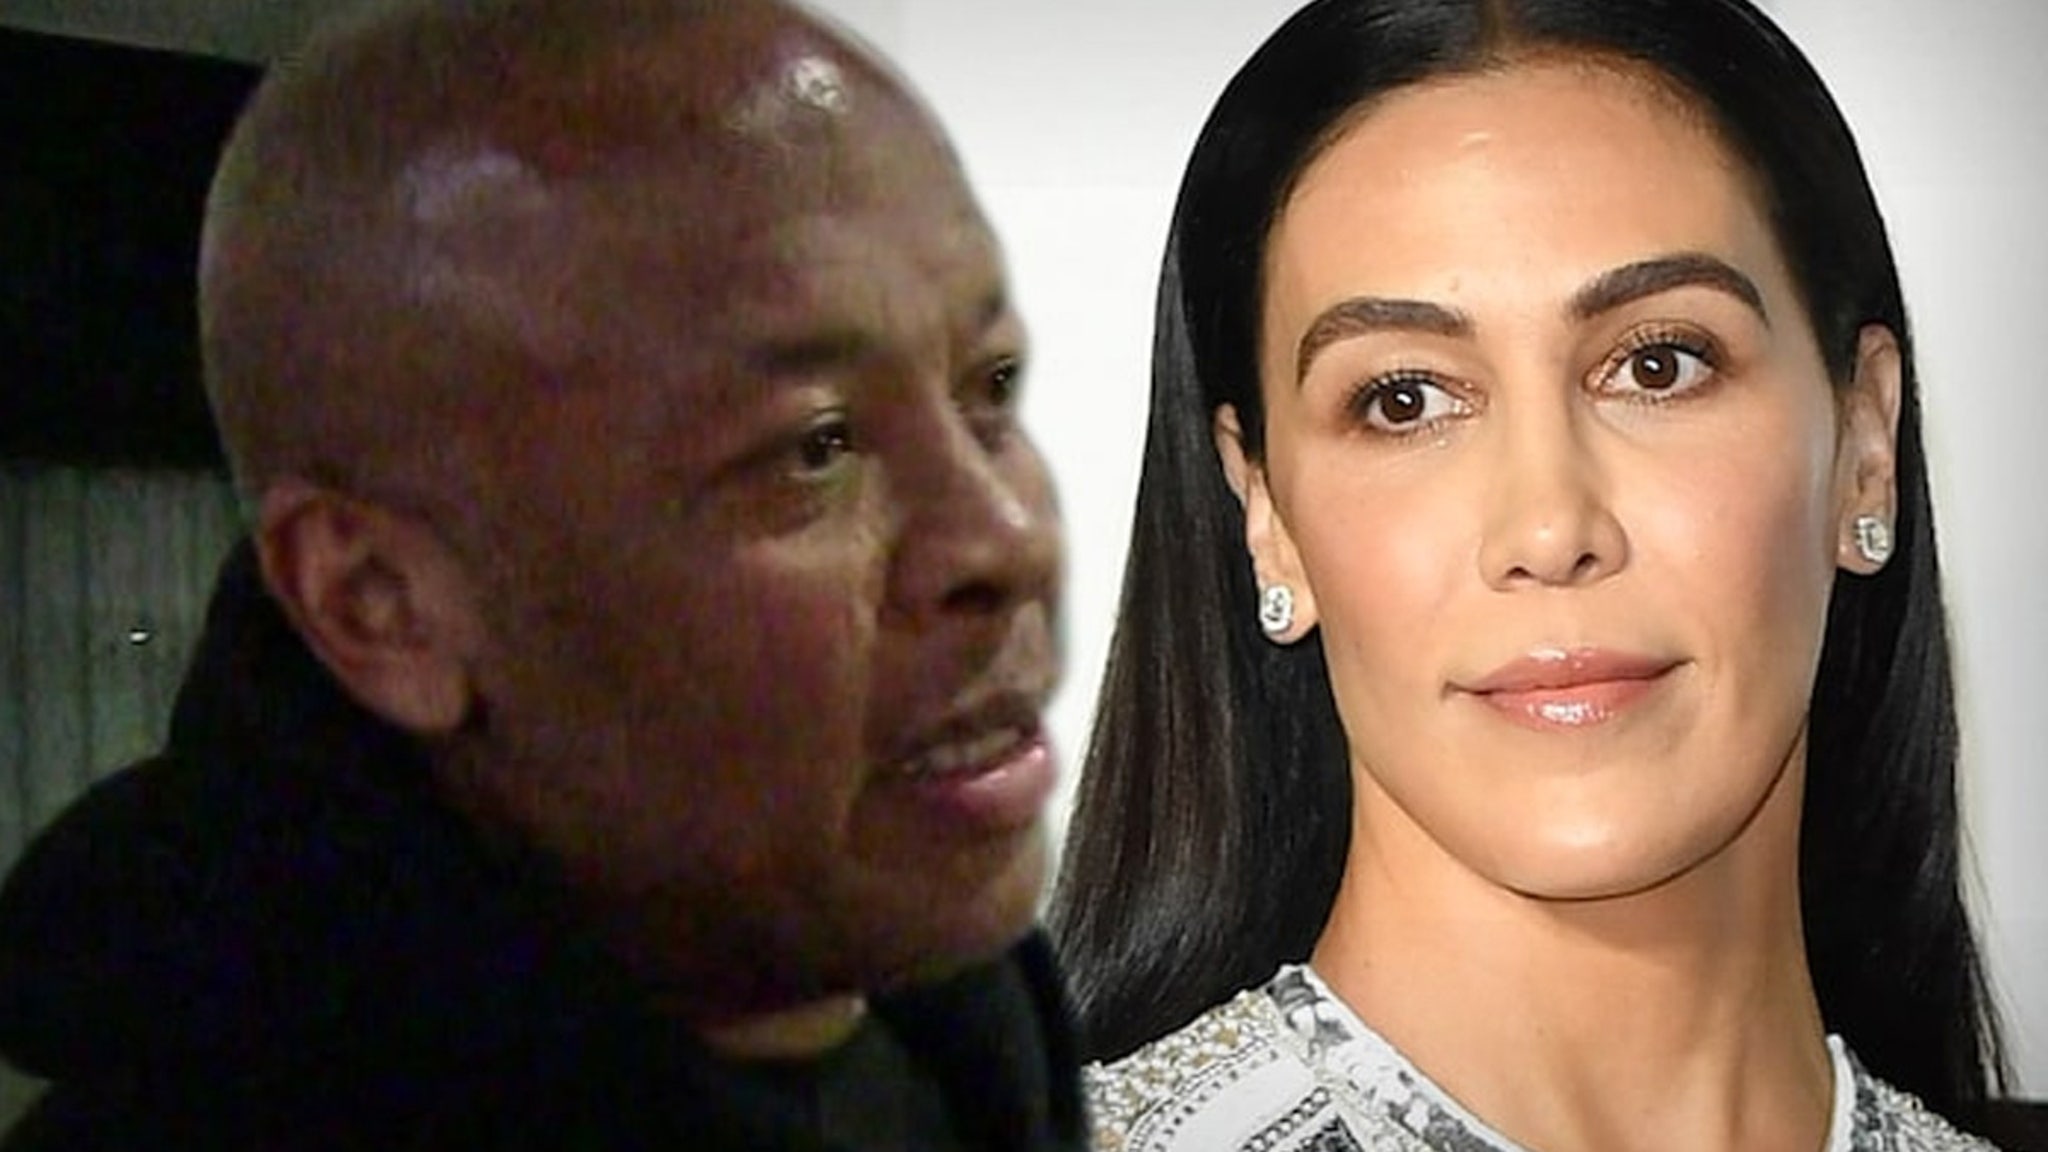 Dr. Dre Files Prenup saying that all properties are separate, but she receives marital support